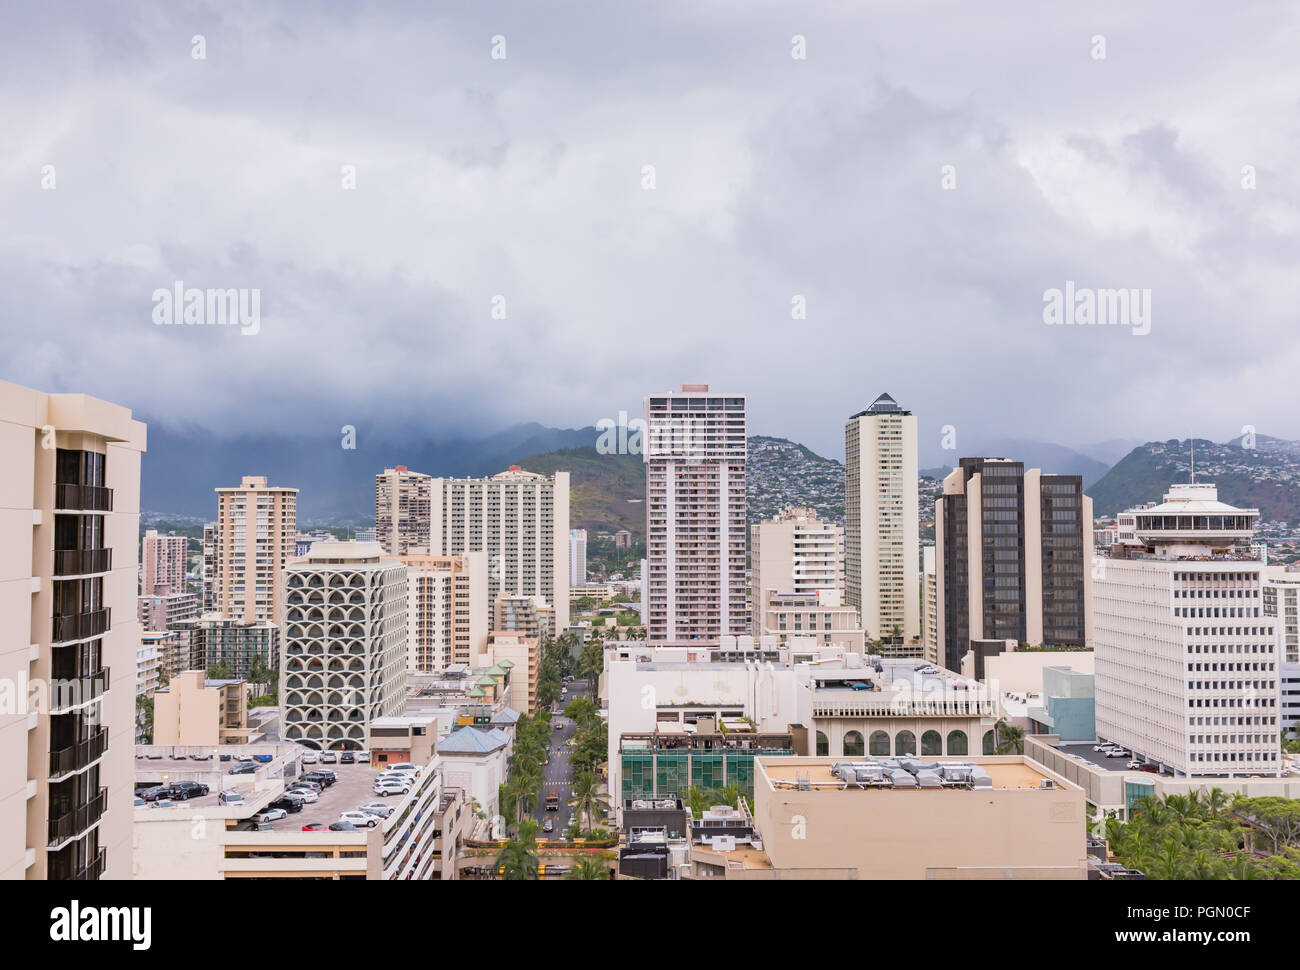 Honolulu, Hawaii / USA - August 26, 2018: Aerial view of clouds over Waikiki tall buildings as aftermath of Hurricane Lane lingers. Stock Photo